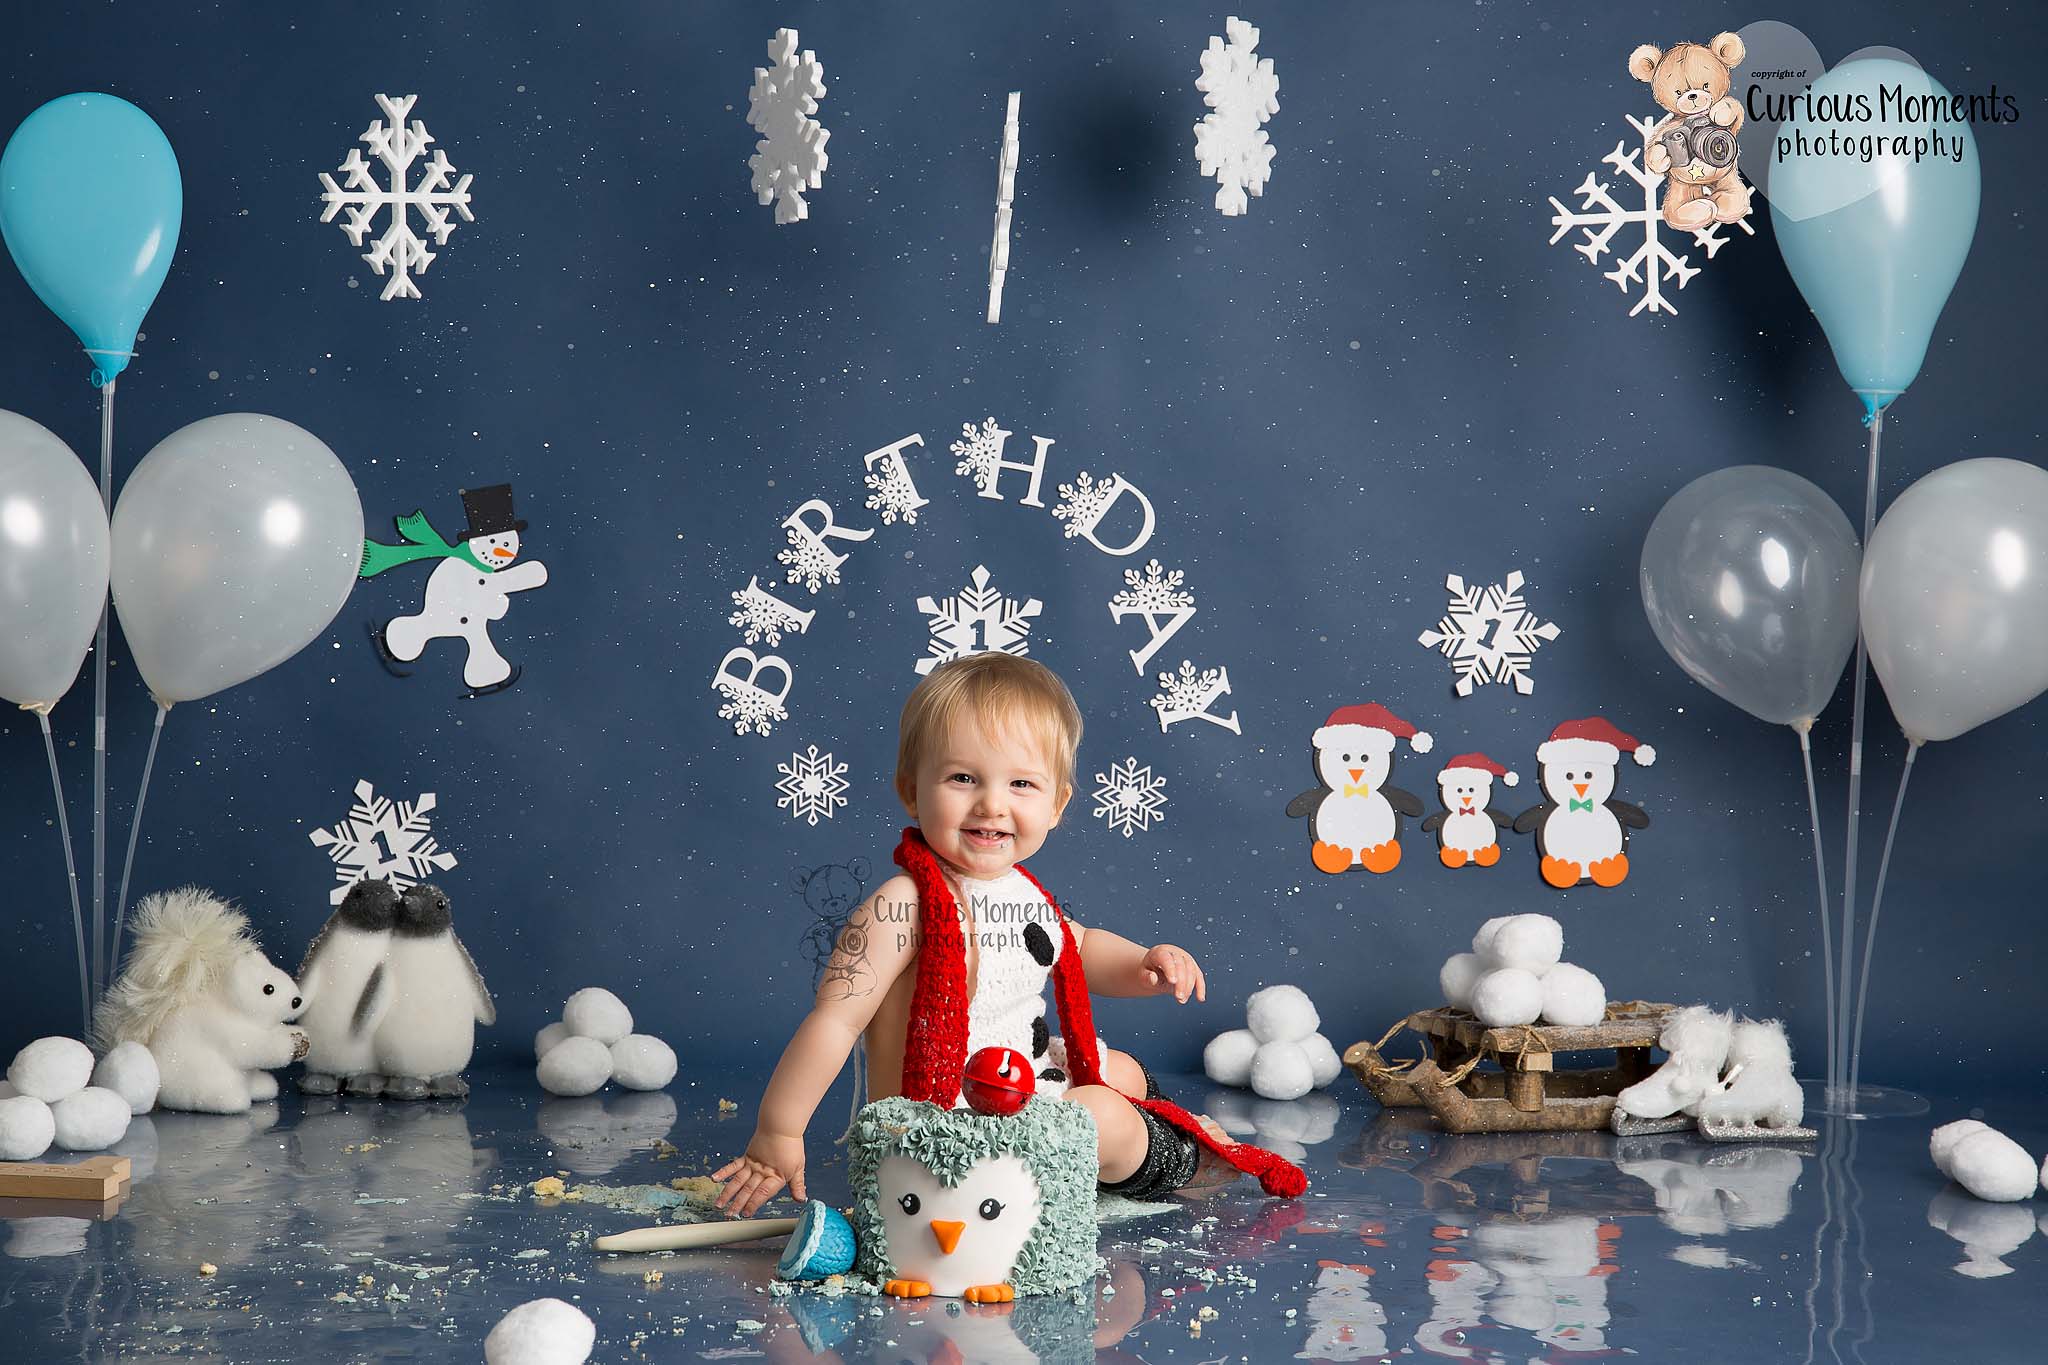 Winter wonderland cake smash for baby boy with snowmen, penguins and snowflakes